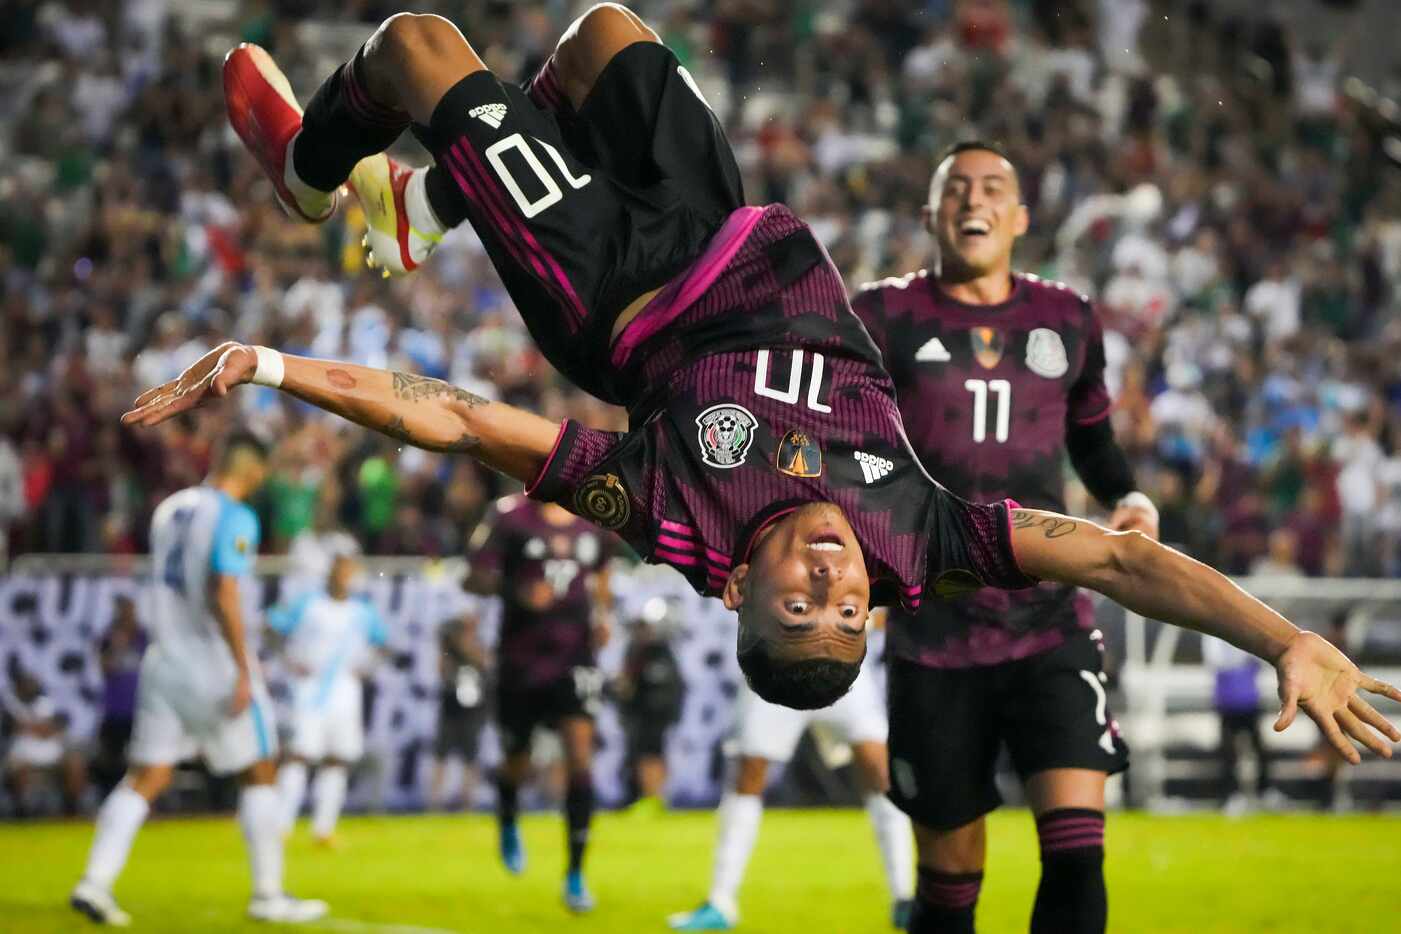 Mexico midfielder Orbelin Pineda celebrates with a flip after scoring past Guatemala...